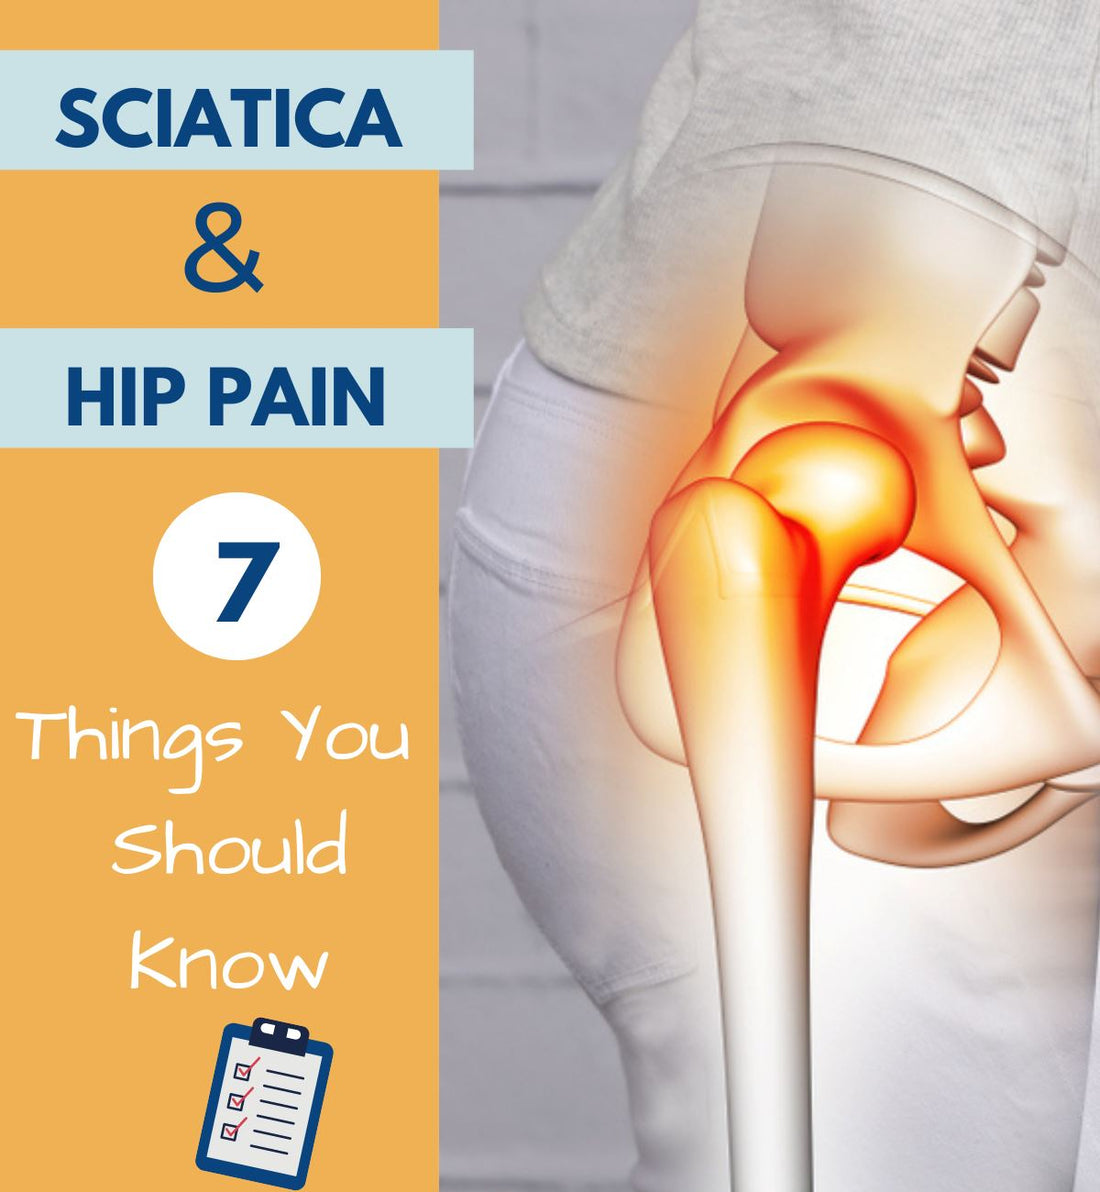 Can Sciatica Cause Hip Pain? 7 Things You to Know